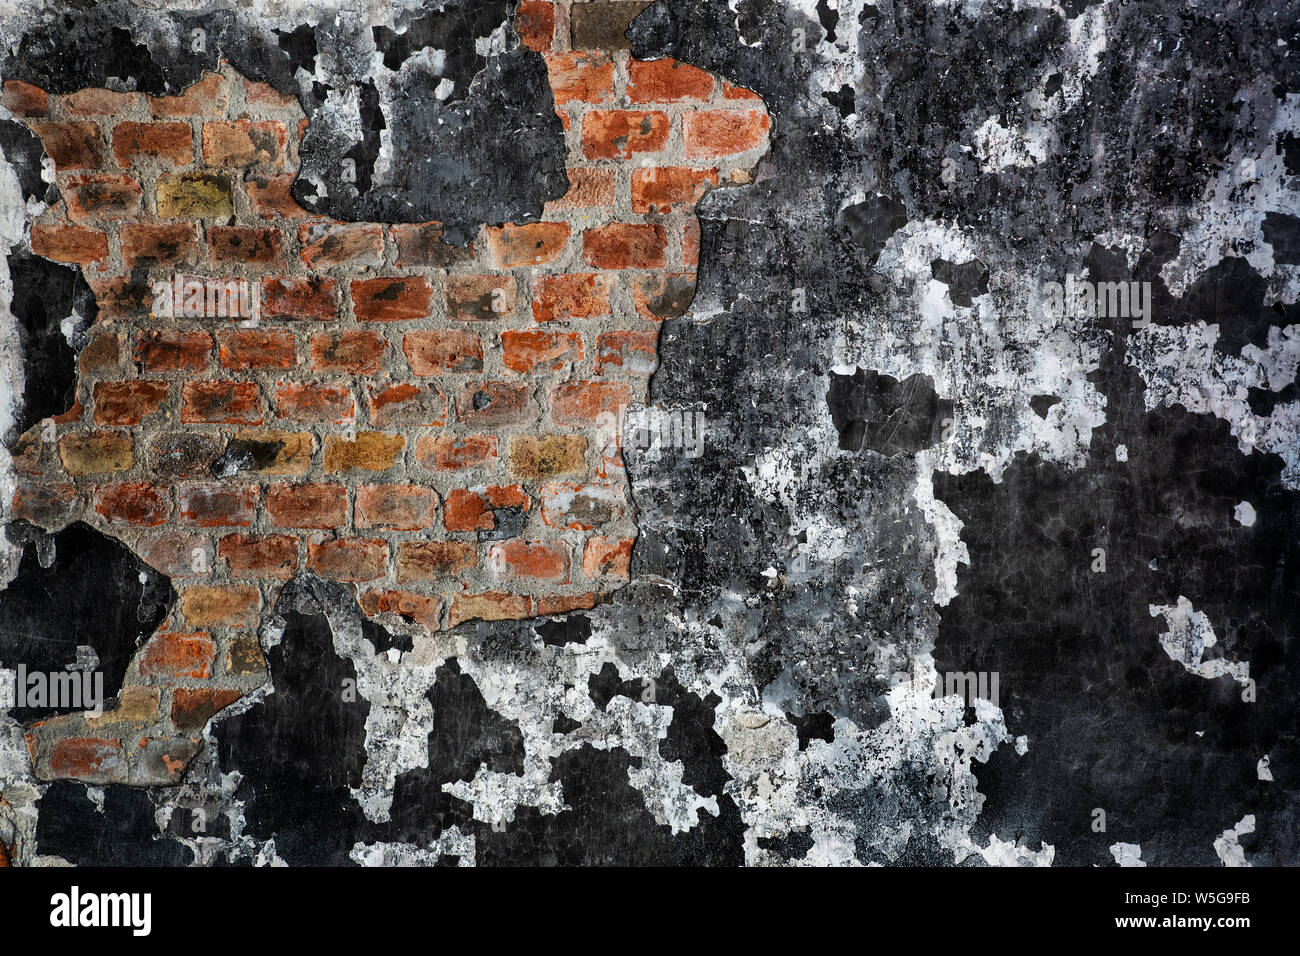 Wall with a burnt peeling paint, now black used to be white, revealing brick structure under plaster in an old, abandoned building, grunge background Stock Photo